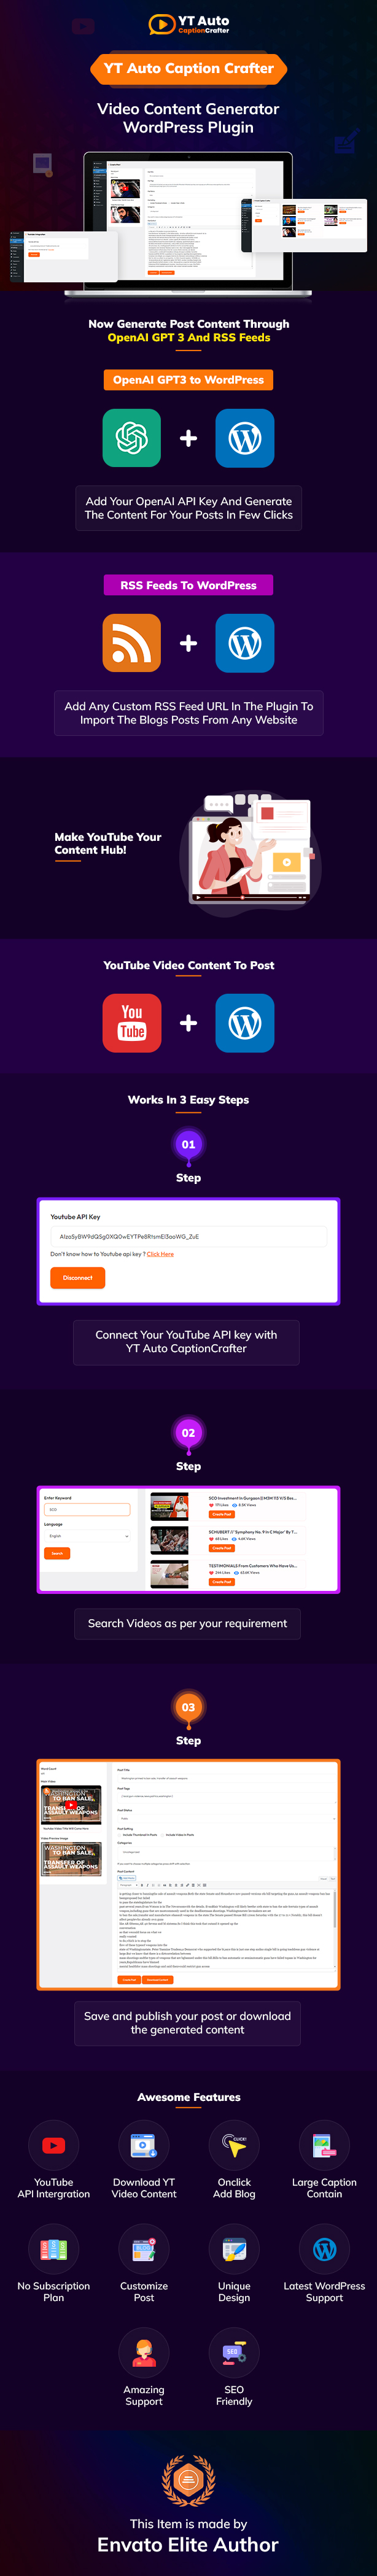 YT Auto - AI Writing Assistant and Video Content Generator WordPress Plugin - 2